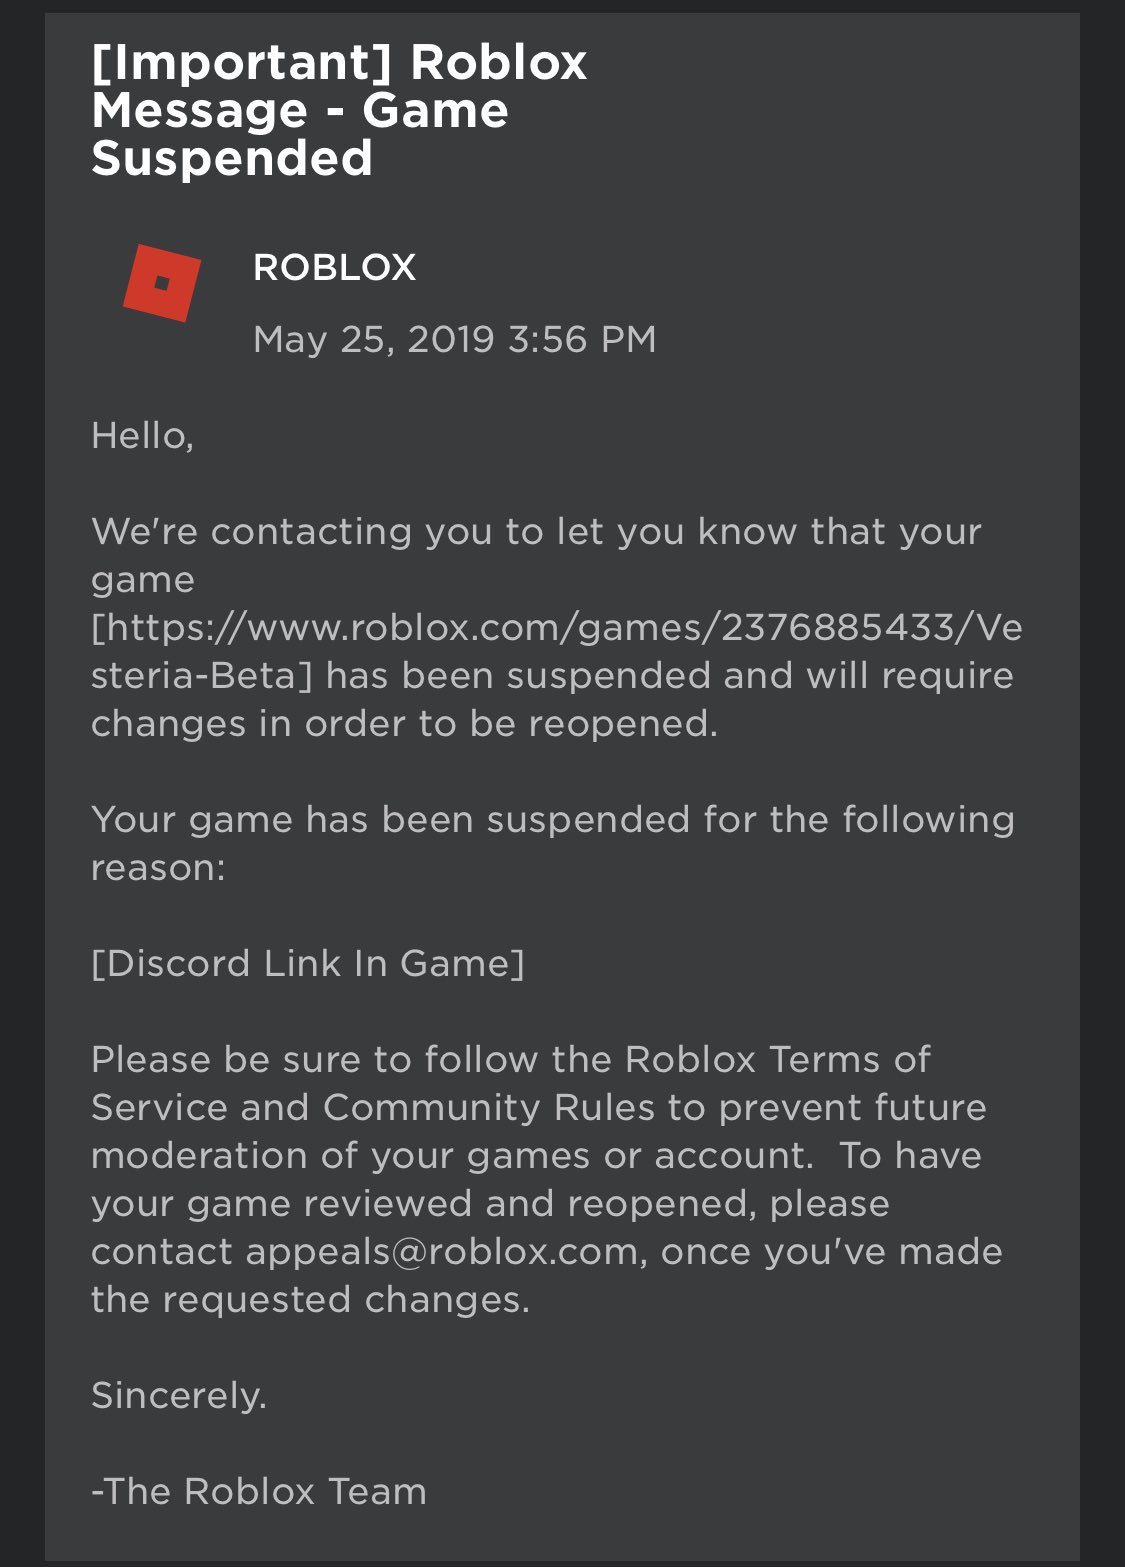 Andrew Bereza On Twitter World Zero Has Discord Code In Their Front Page Menu For Months Moderation Vesteria Puts Code Not Link In Our Intro Mods Https T Co Lkbw2vpl2v - roblox discord link